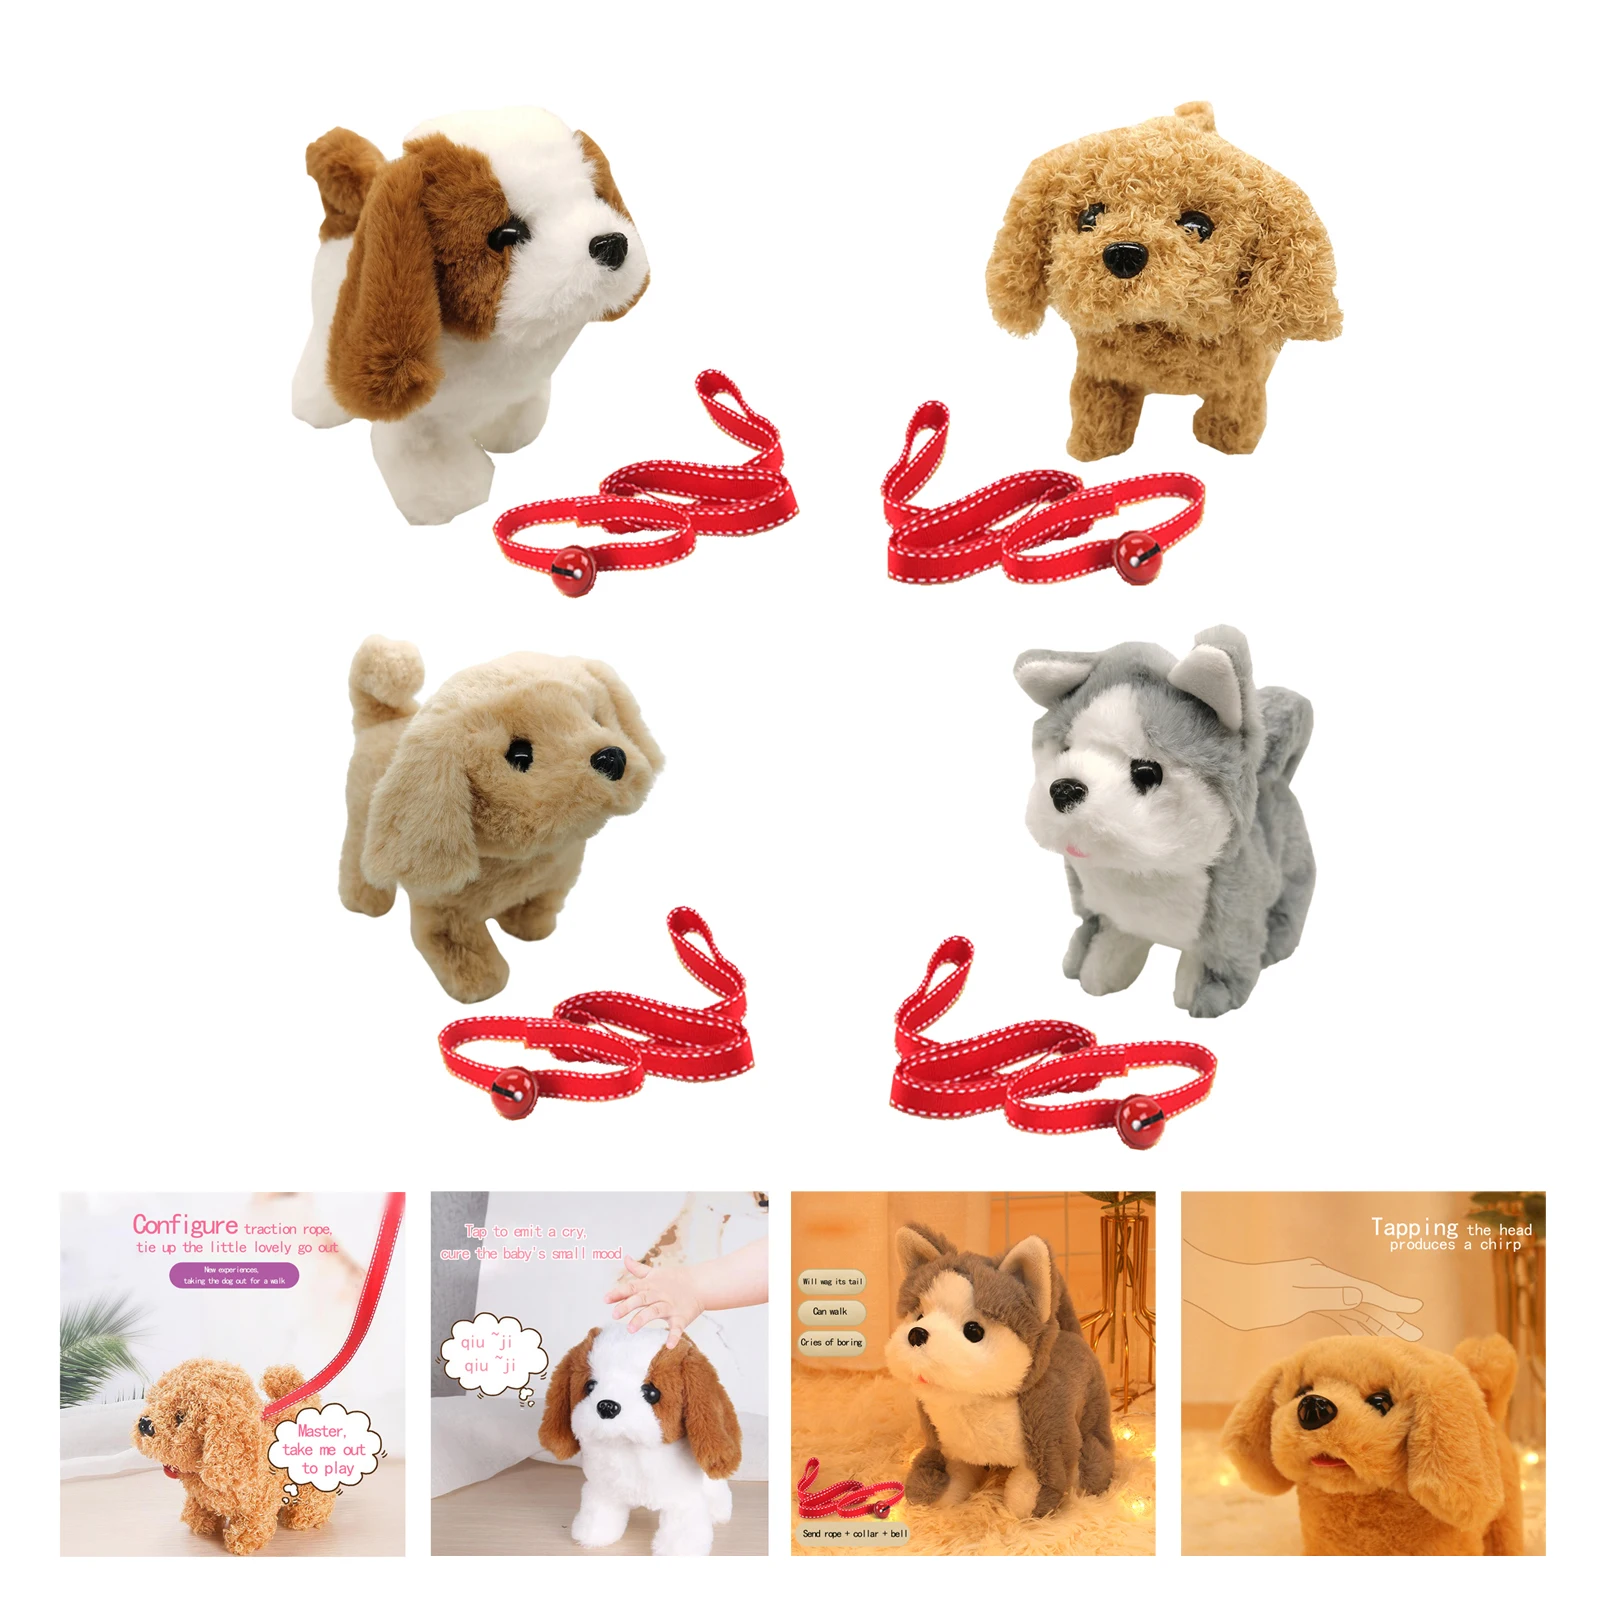 Electronic Plush Dog Barking Tail Wagging Vivid Cute Simulation Animal for Kids Toddlers Birthday Gift Play House Stuff for Kids